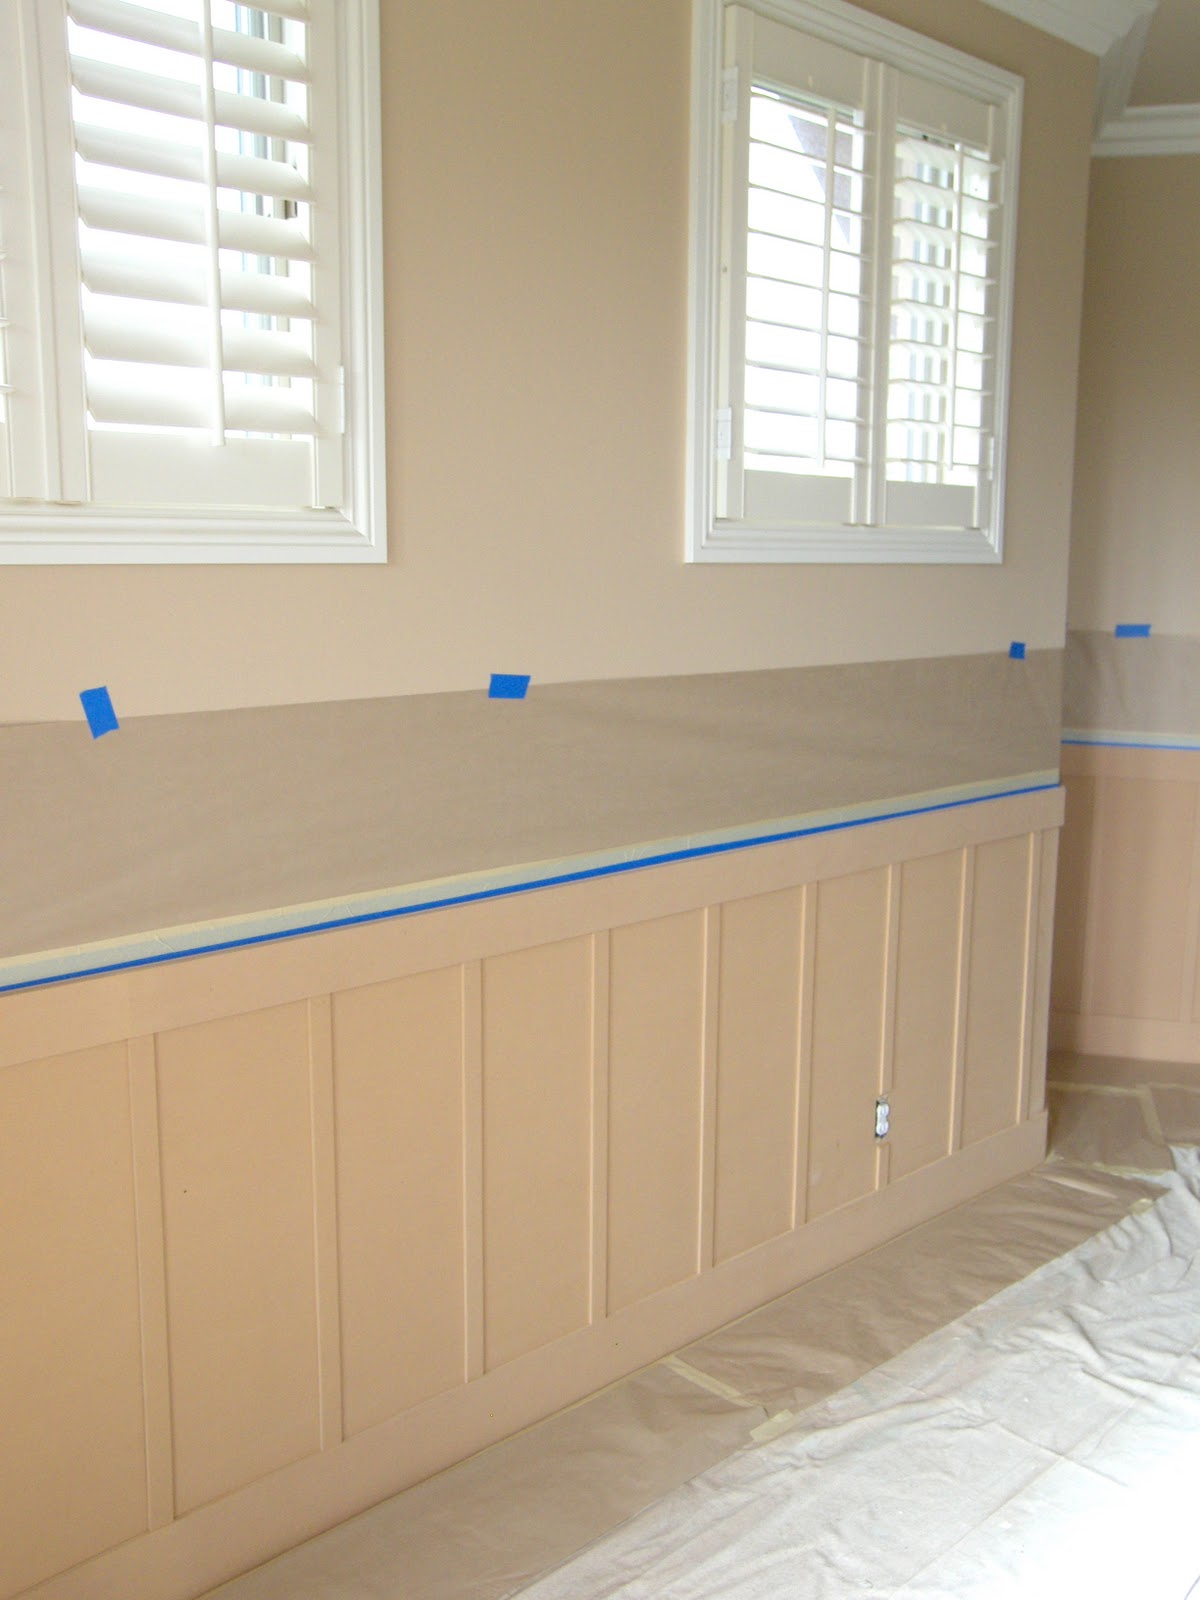 Project Master Bedroom Remodel Wainscot Wallpaper And Paint